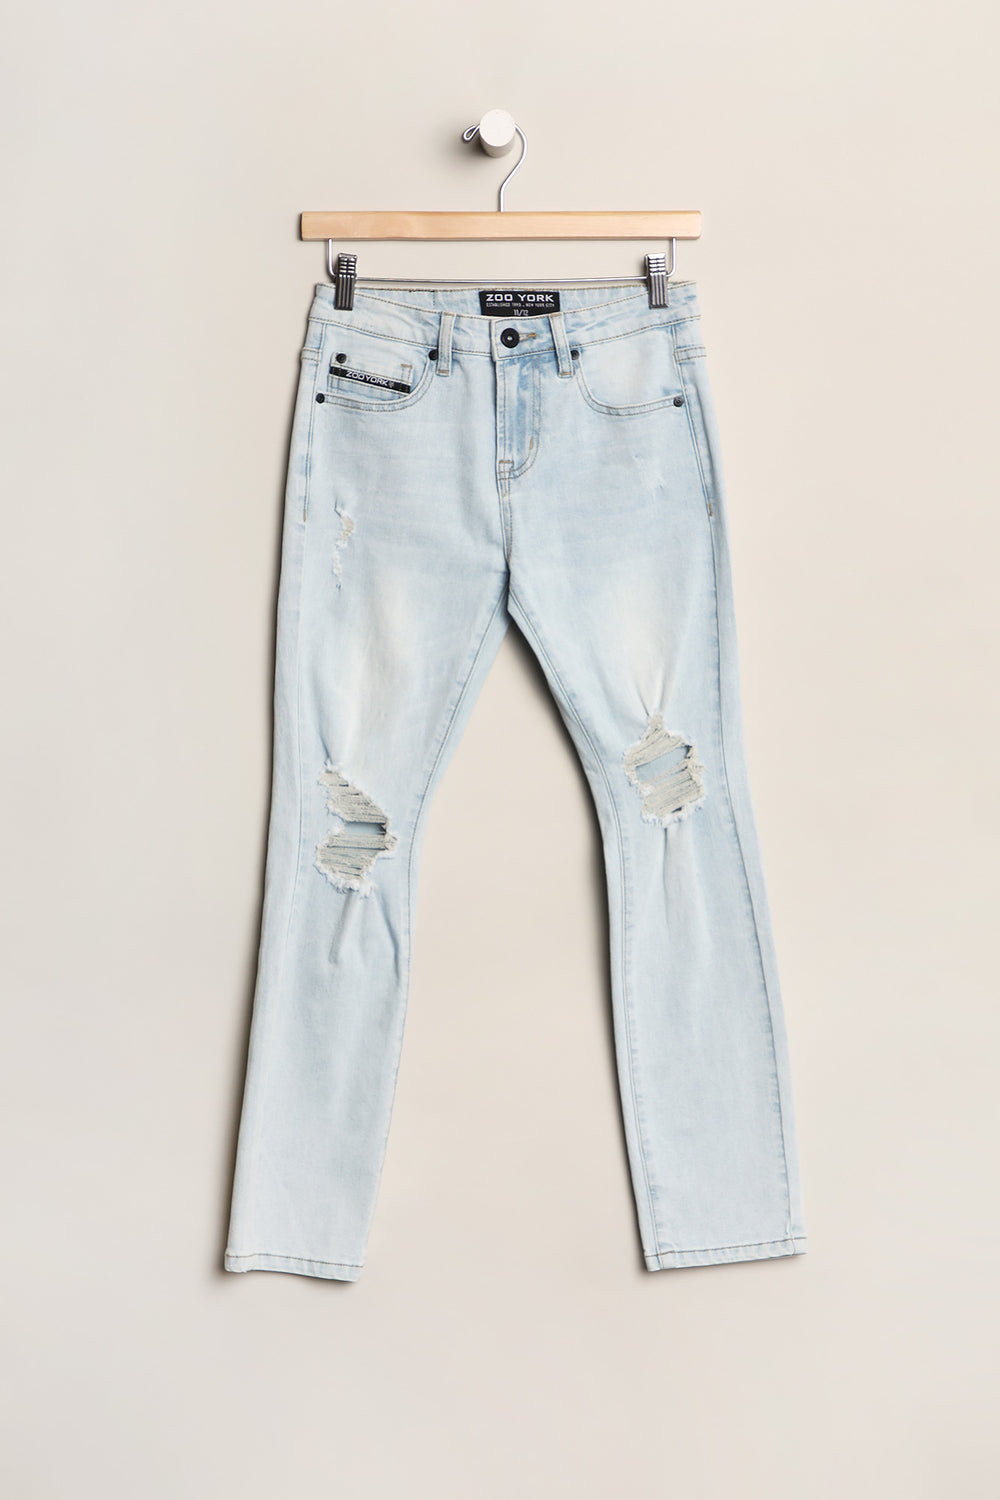 Zoo York Youth Skinny Distressed Jeans Light Blue